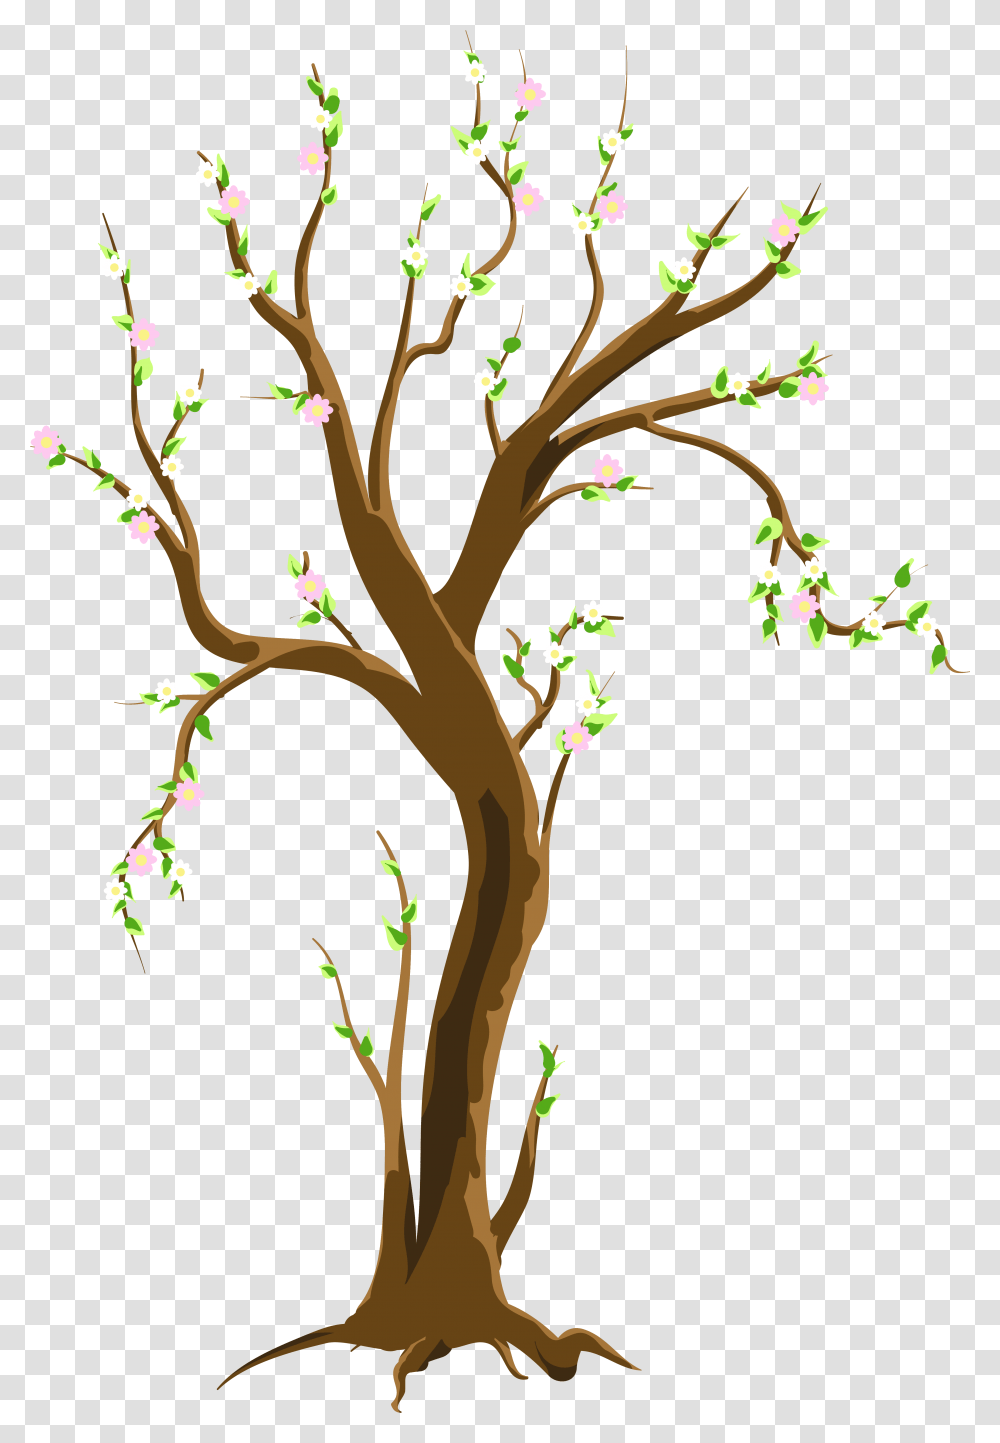 Springtime Tree Black And White Tree In Spring Clipart, Plant, Vegetation, Tree Trunk, Outdoors Transparent Png